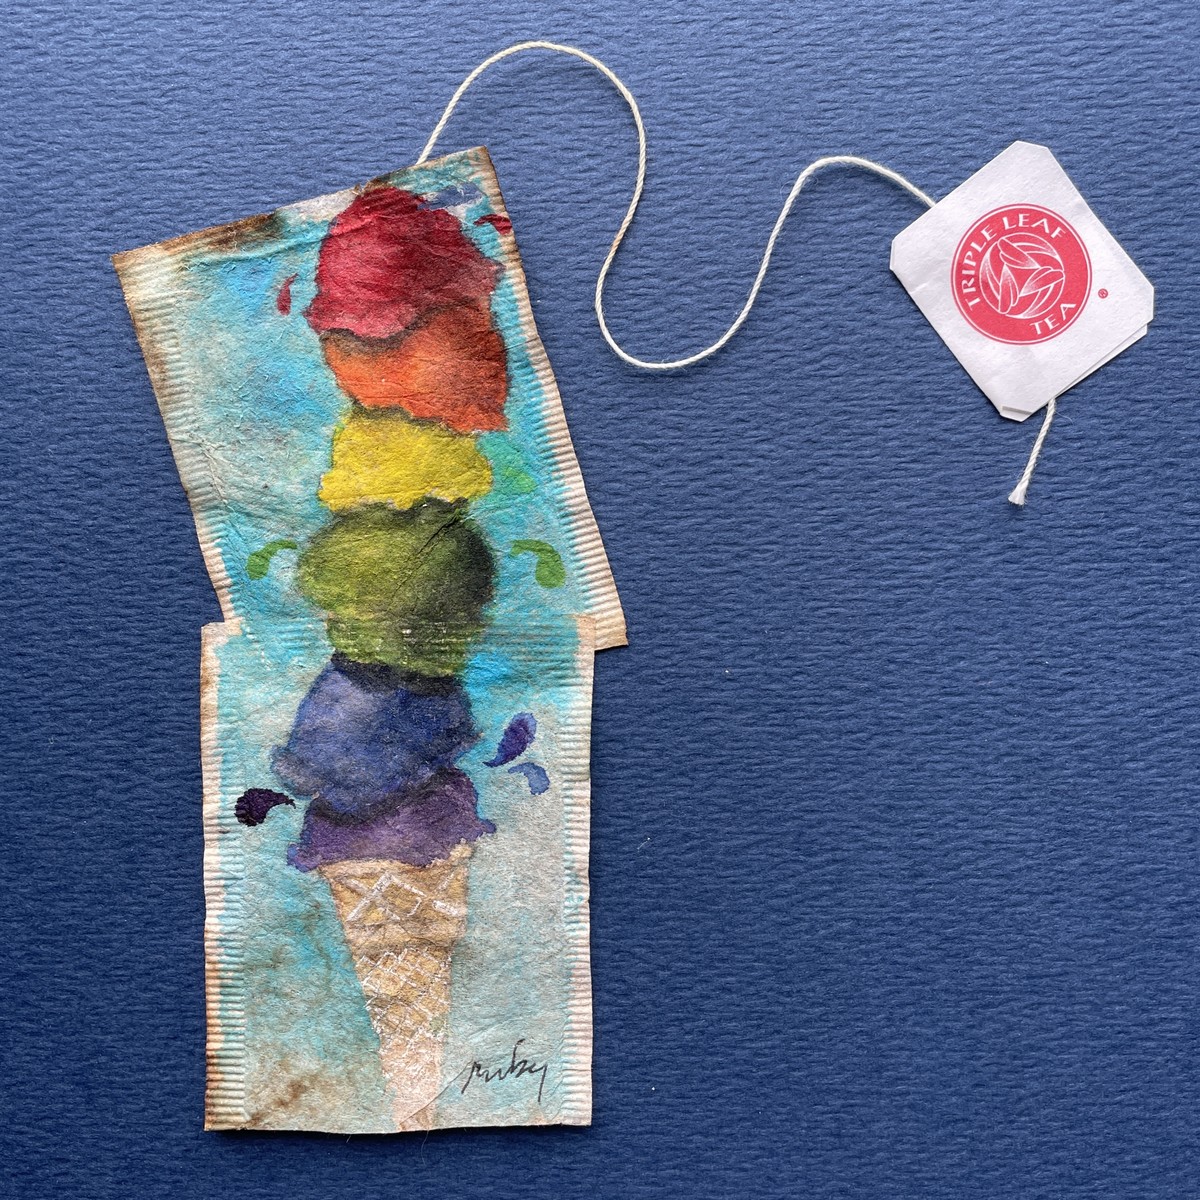 Online Course - The Art of Tea Bag Painting (Ruby Silvious